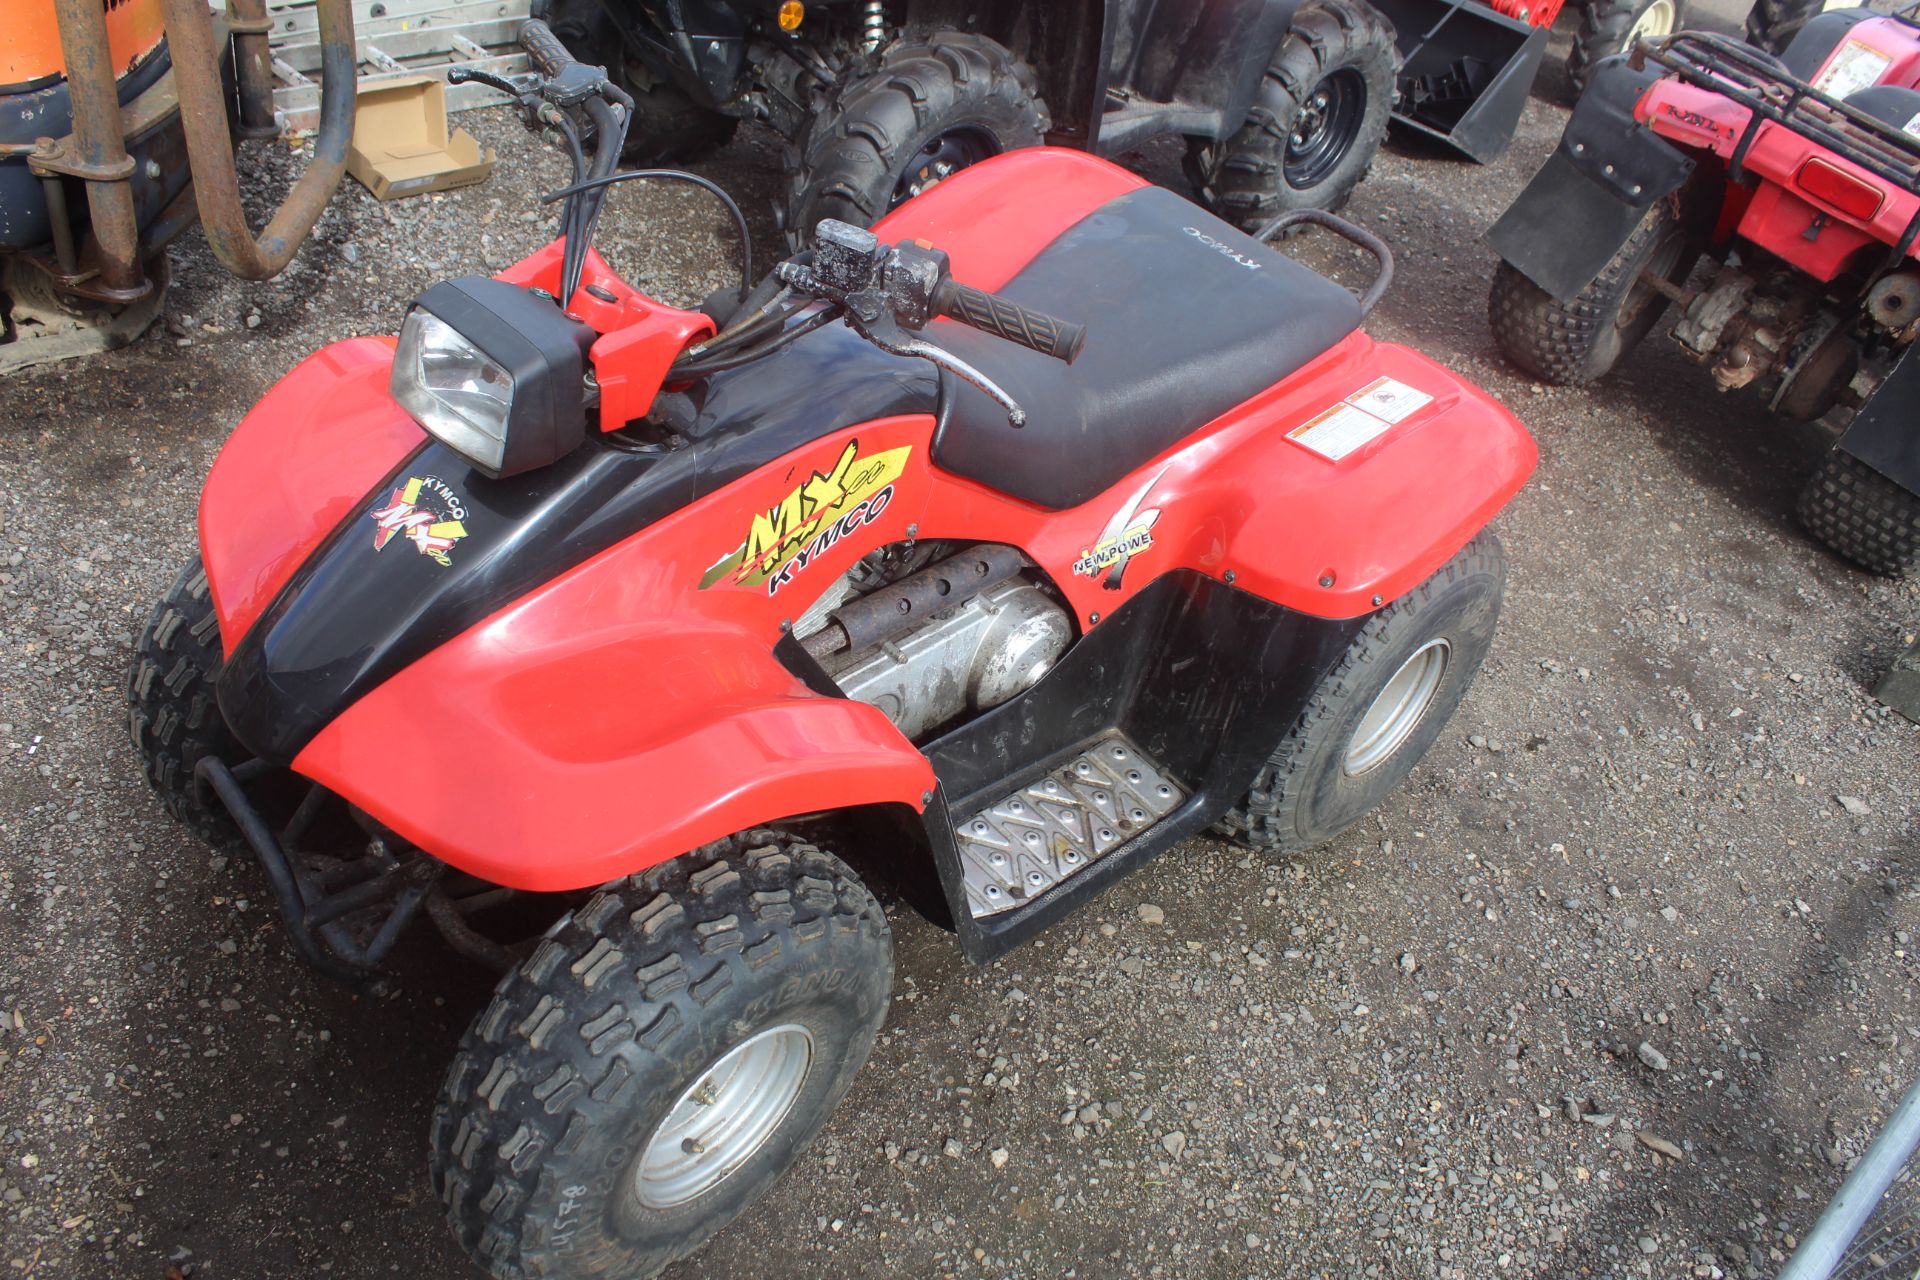 Kymco MX'er 150cc off road ATV. 2004. owned from new. Key, Manual held. - Image 2 of 18